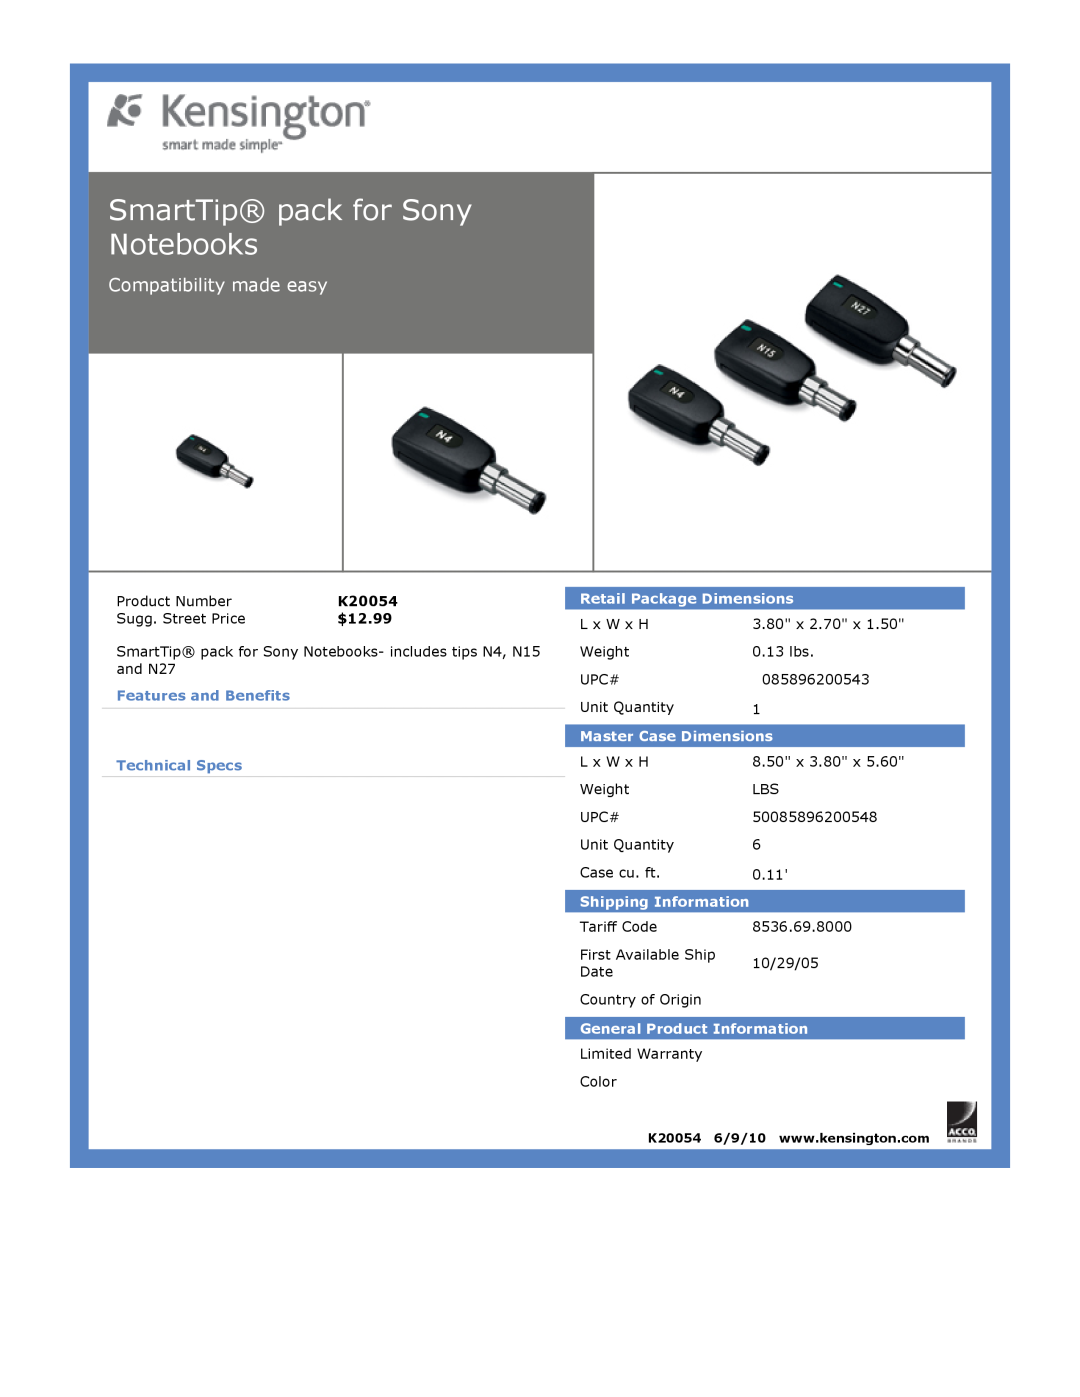 Kensington EU64325 dimensions SmartTip pack for Sony Notebooks, Compatibility made easy, $12.99, Retail Package Dimensions 